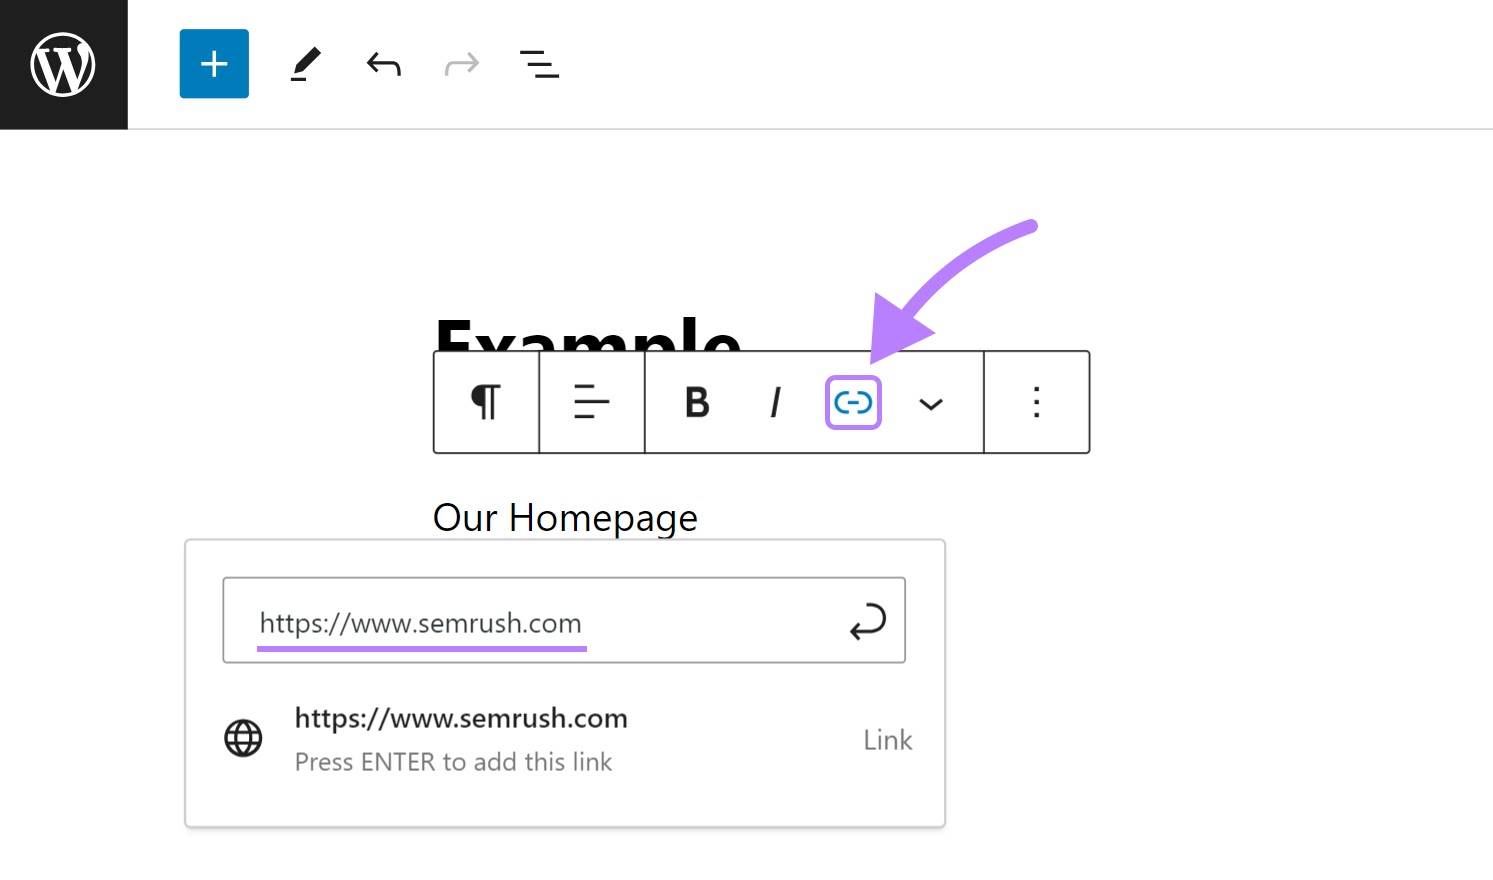 Linking "Our Homepage" text to "semrush.com" in WordPress editor